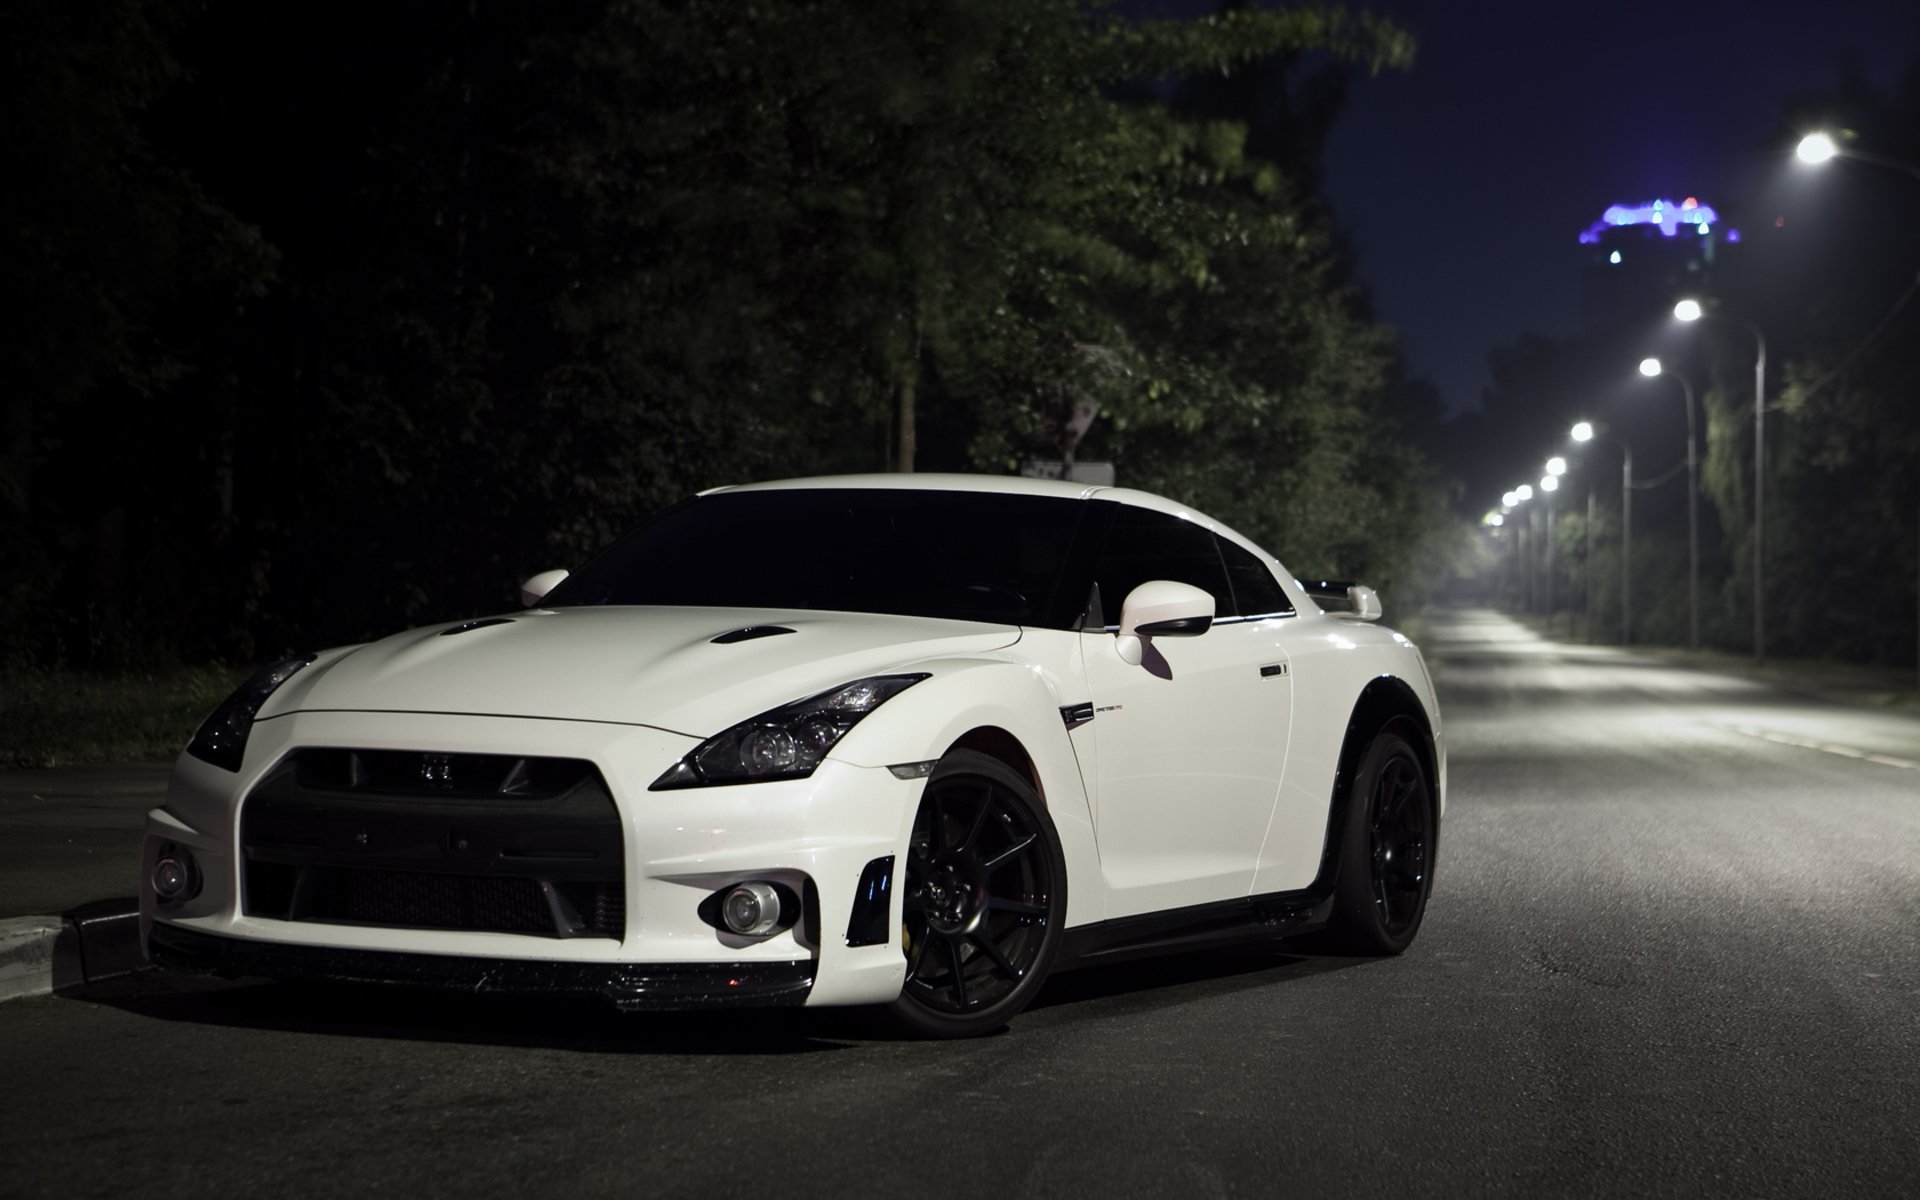 A white nissan gtr stands under the night lights.